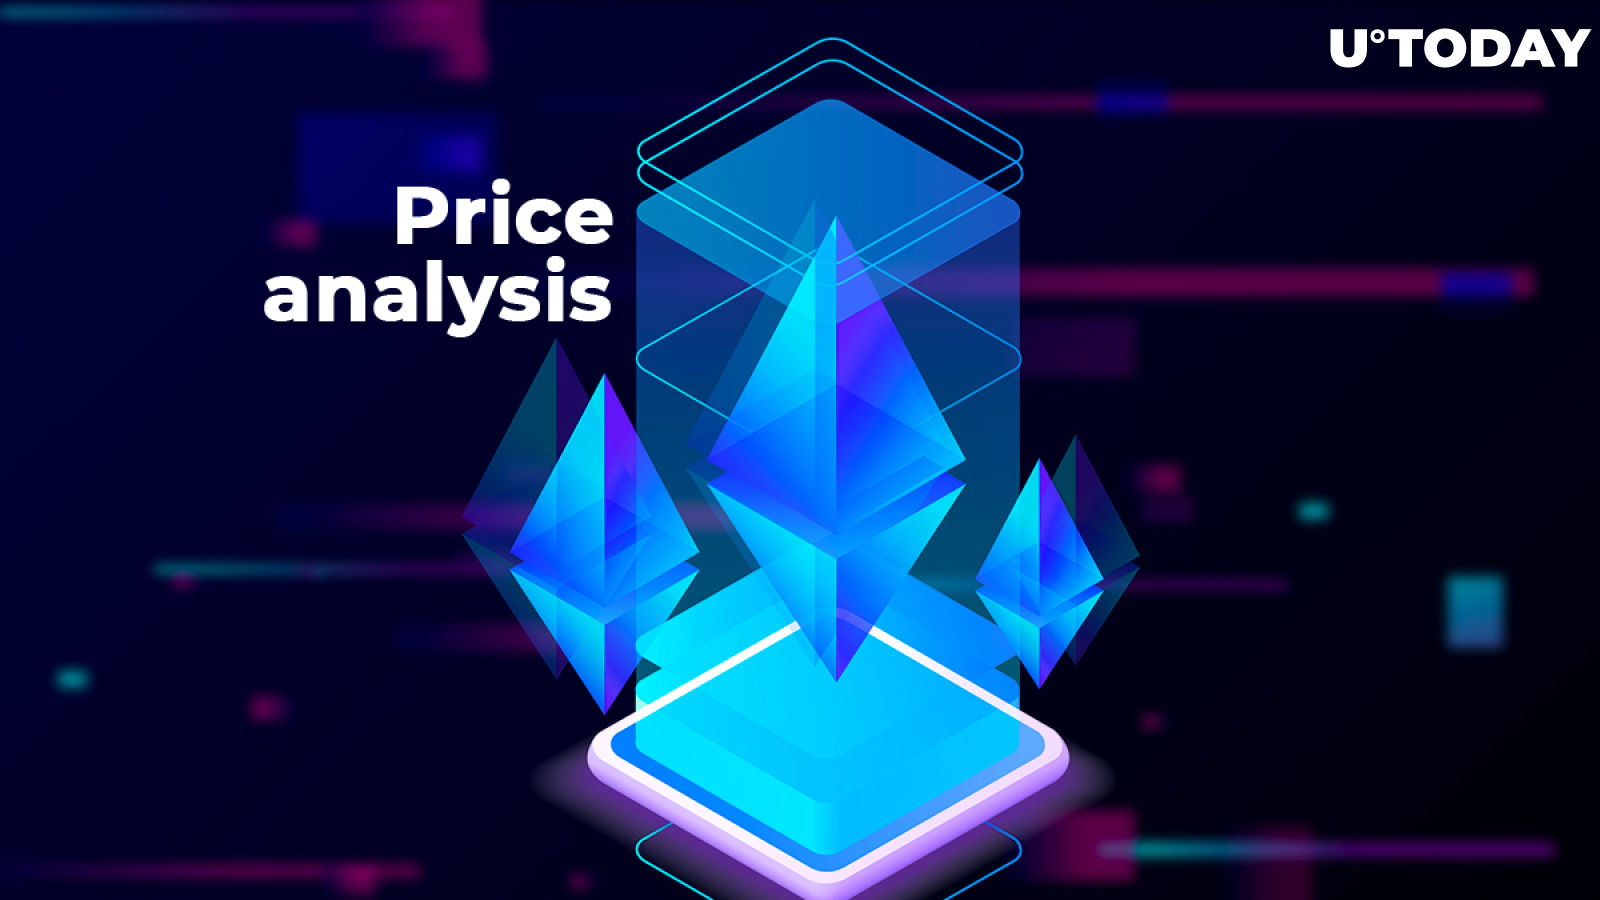 [UPDATED] Ethereum (ETH) Price Analysis: Are Bulls Ready for $200?